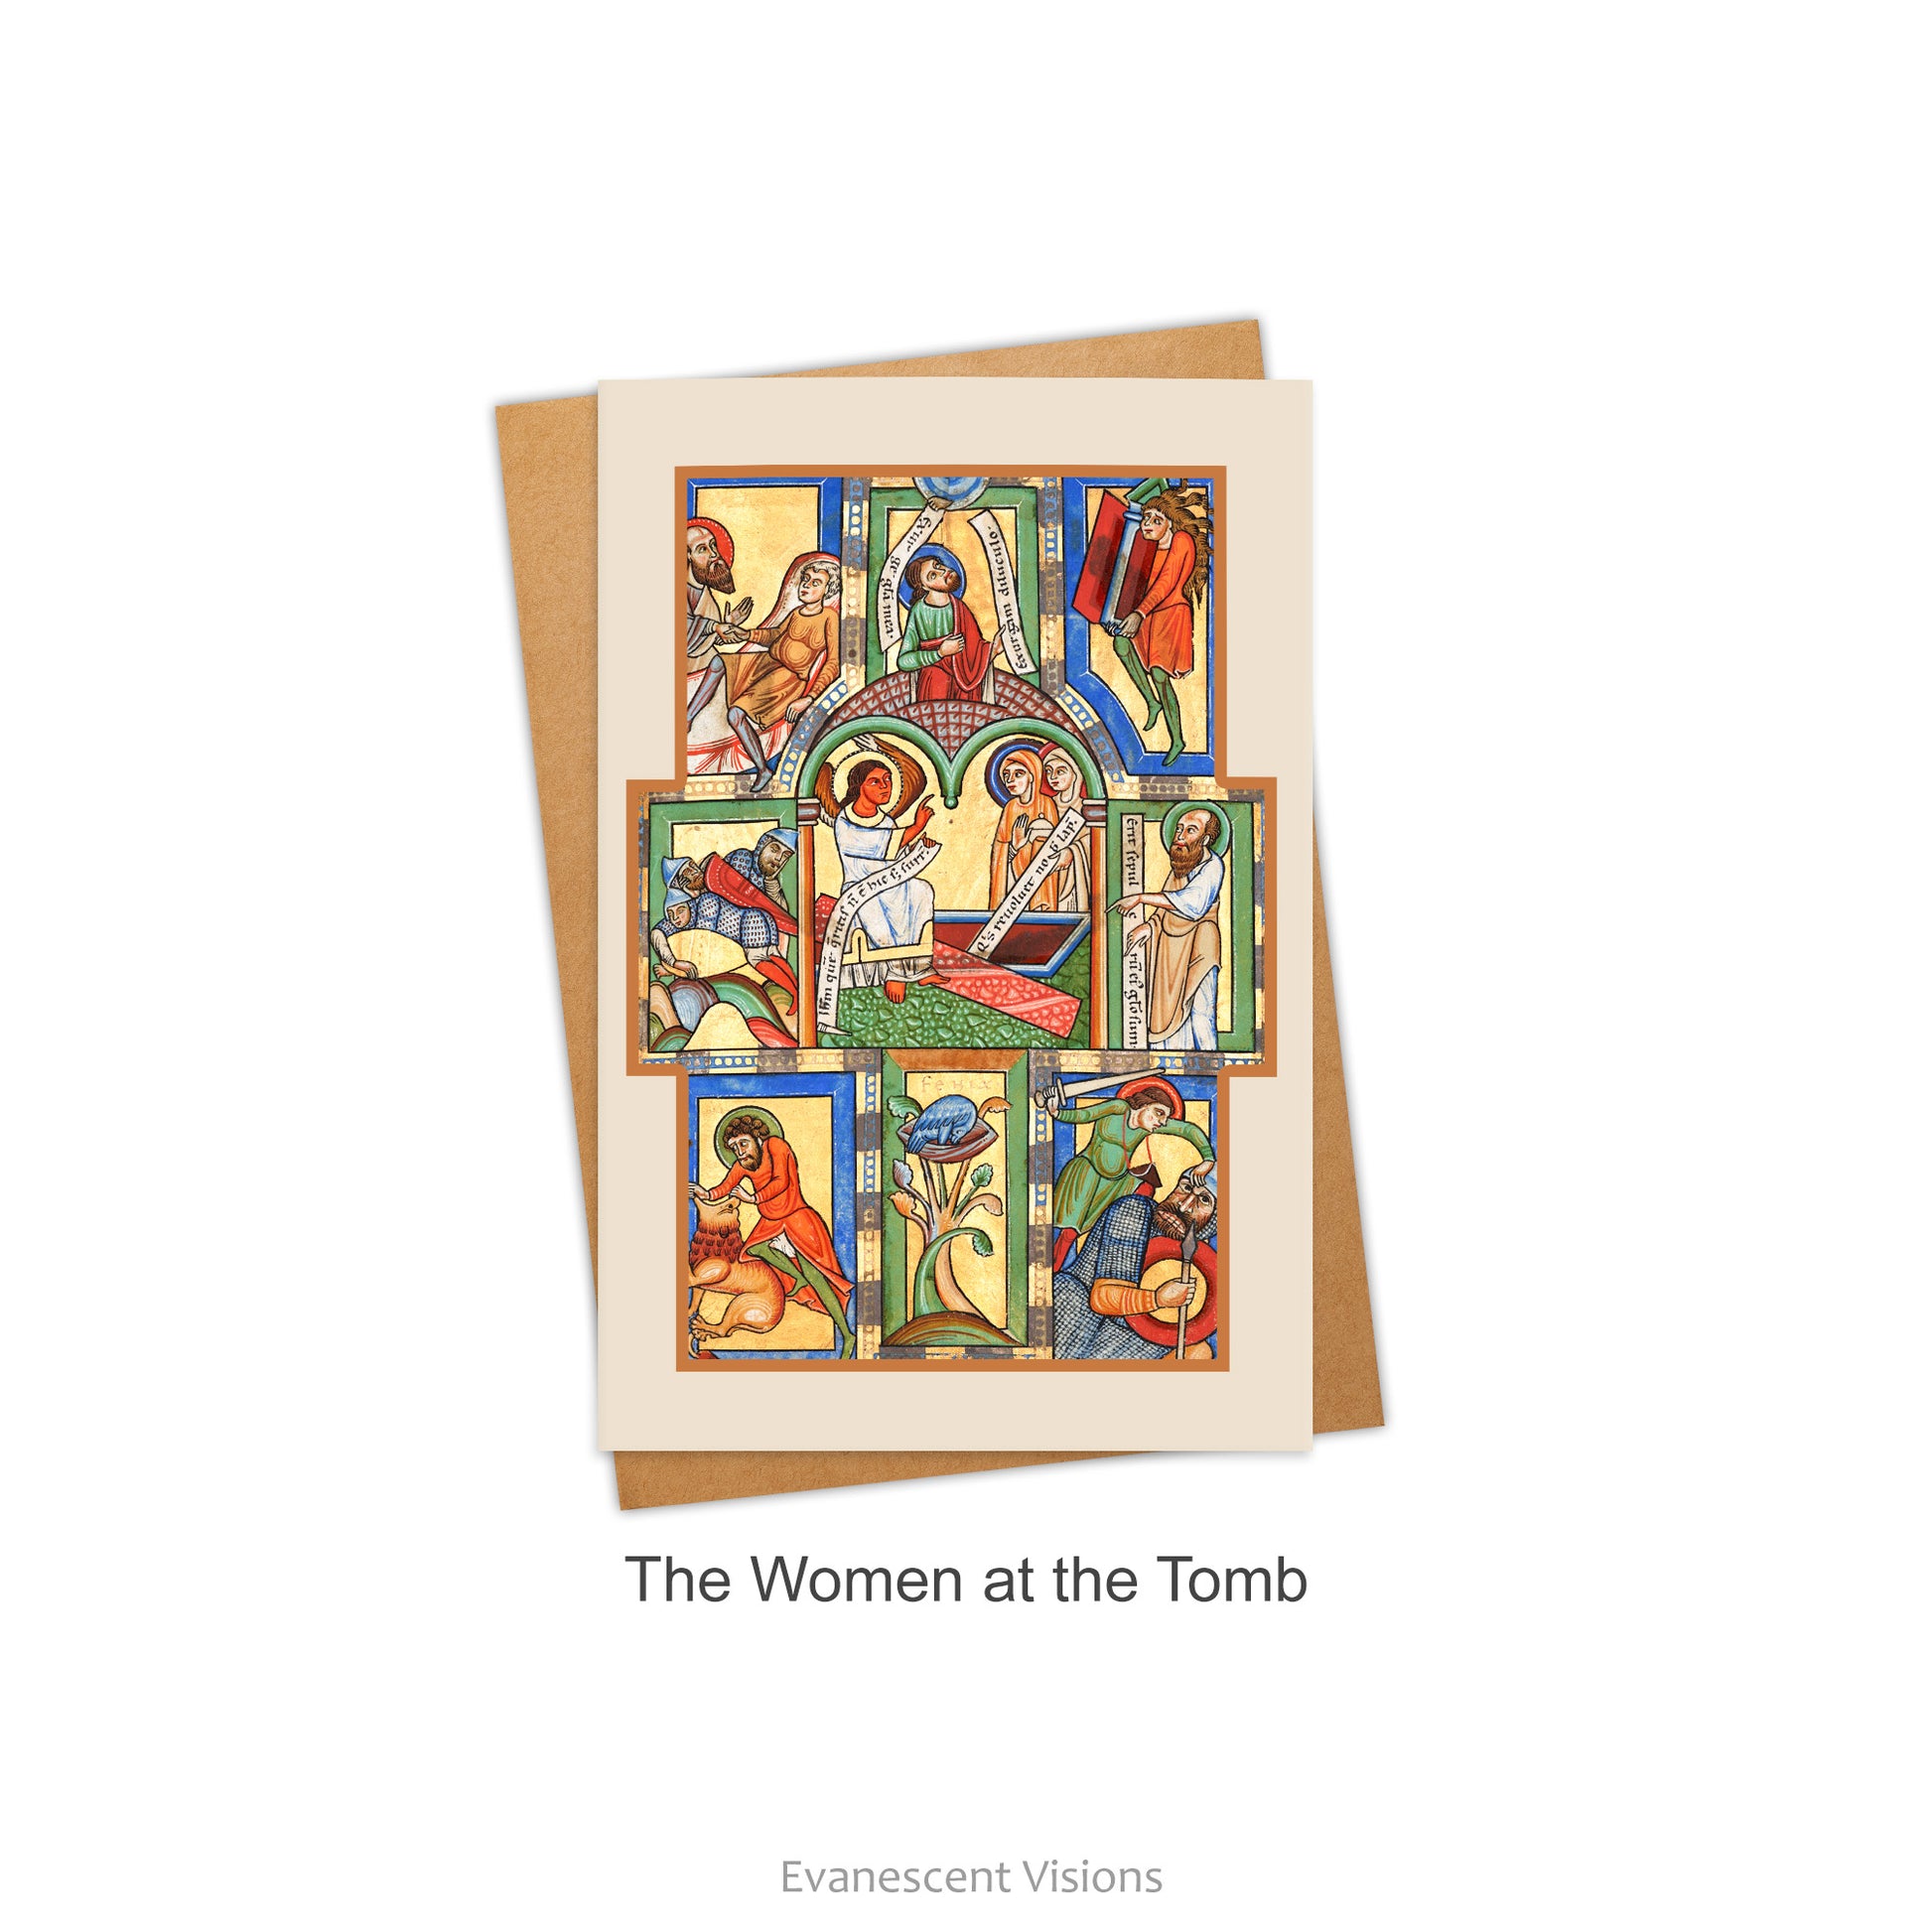 Card and envelope. Image on card is a Medieval Illumination from the Stammheim Missal, 'The Women at the Tomb.'